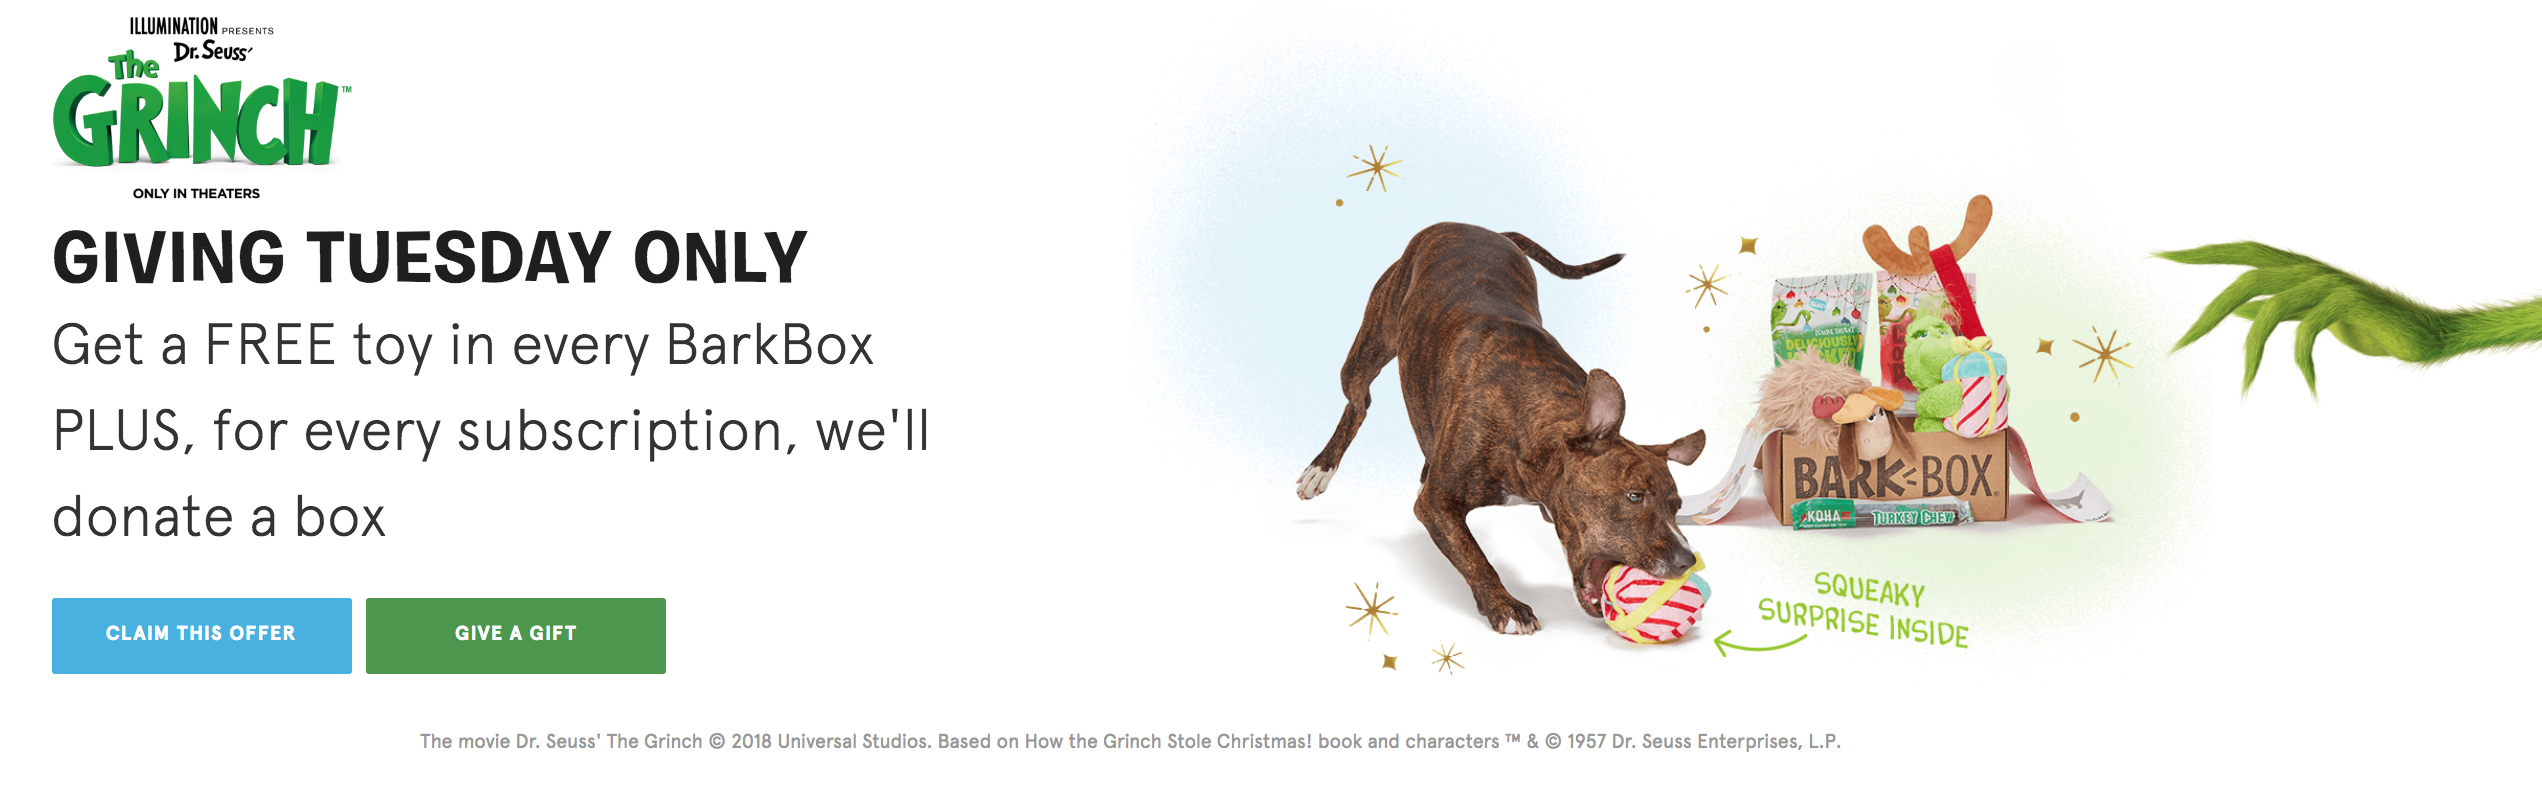 BarkBox Giving Tuesday Deal – Free Bonus Toy Every Month + Donation!